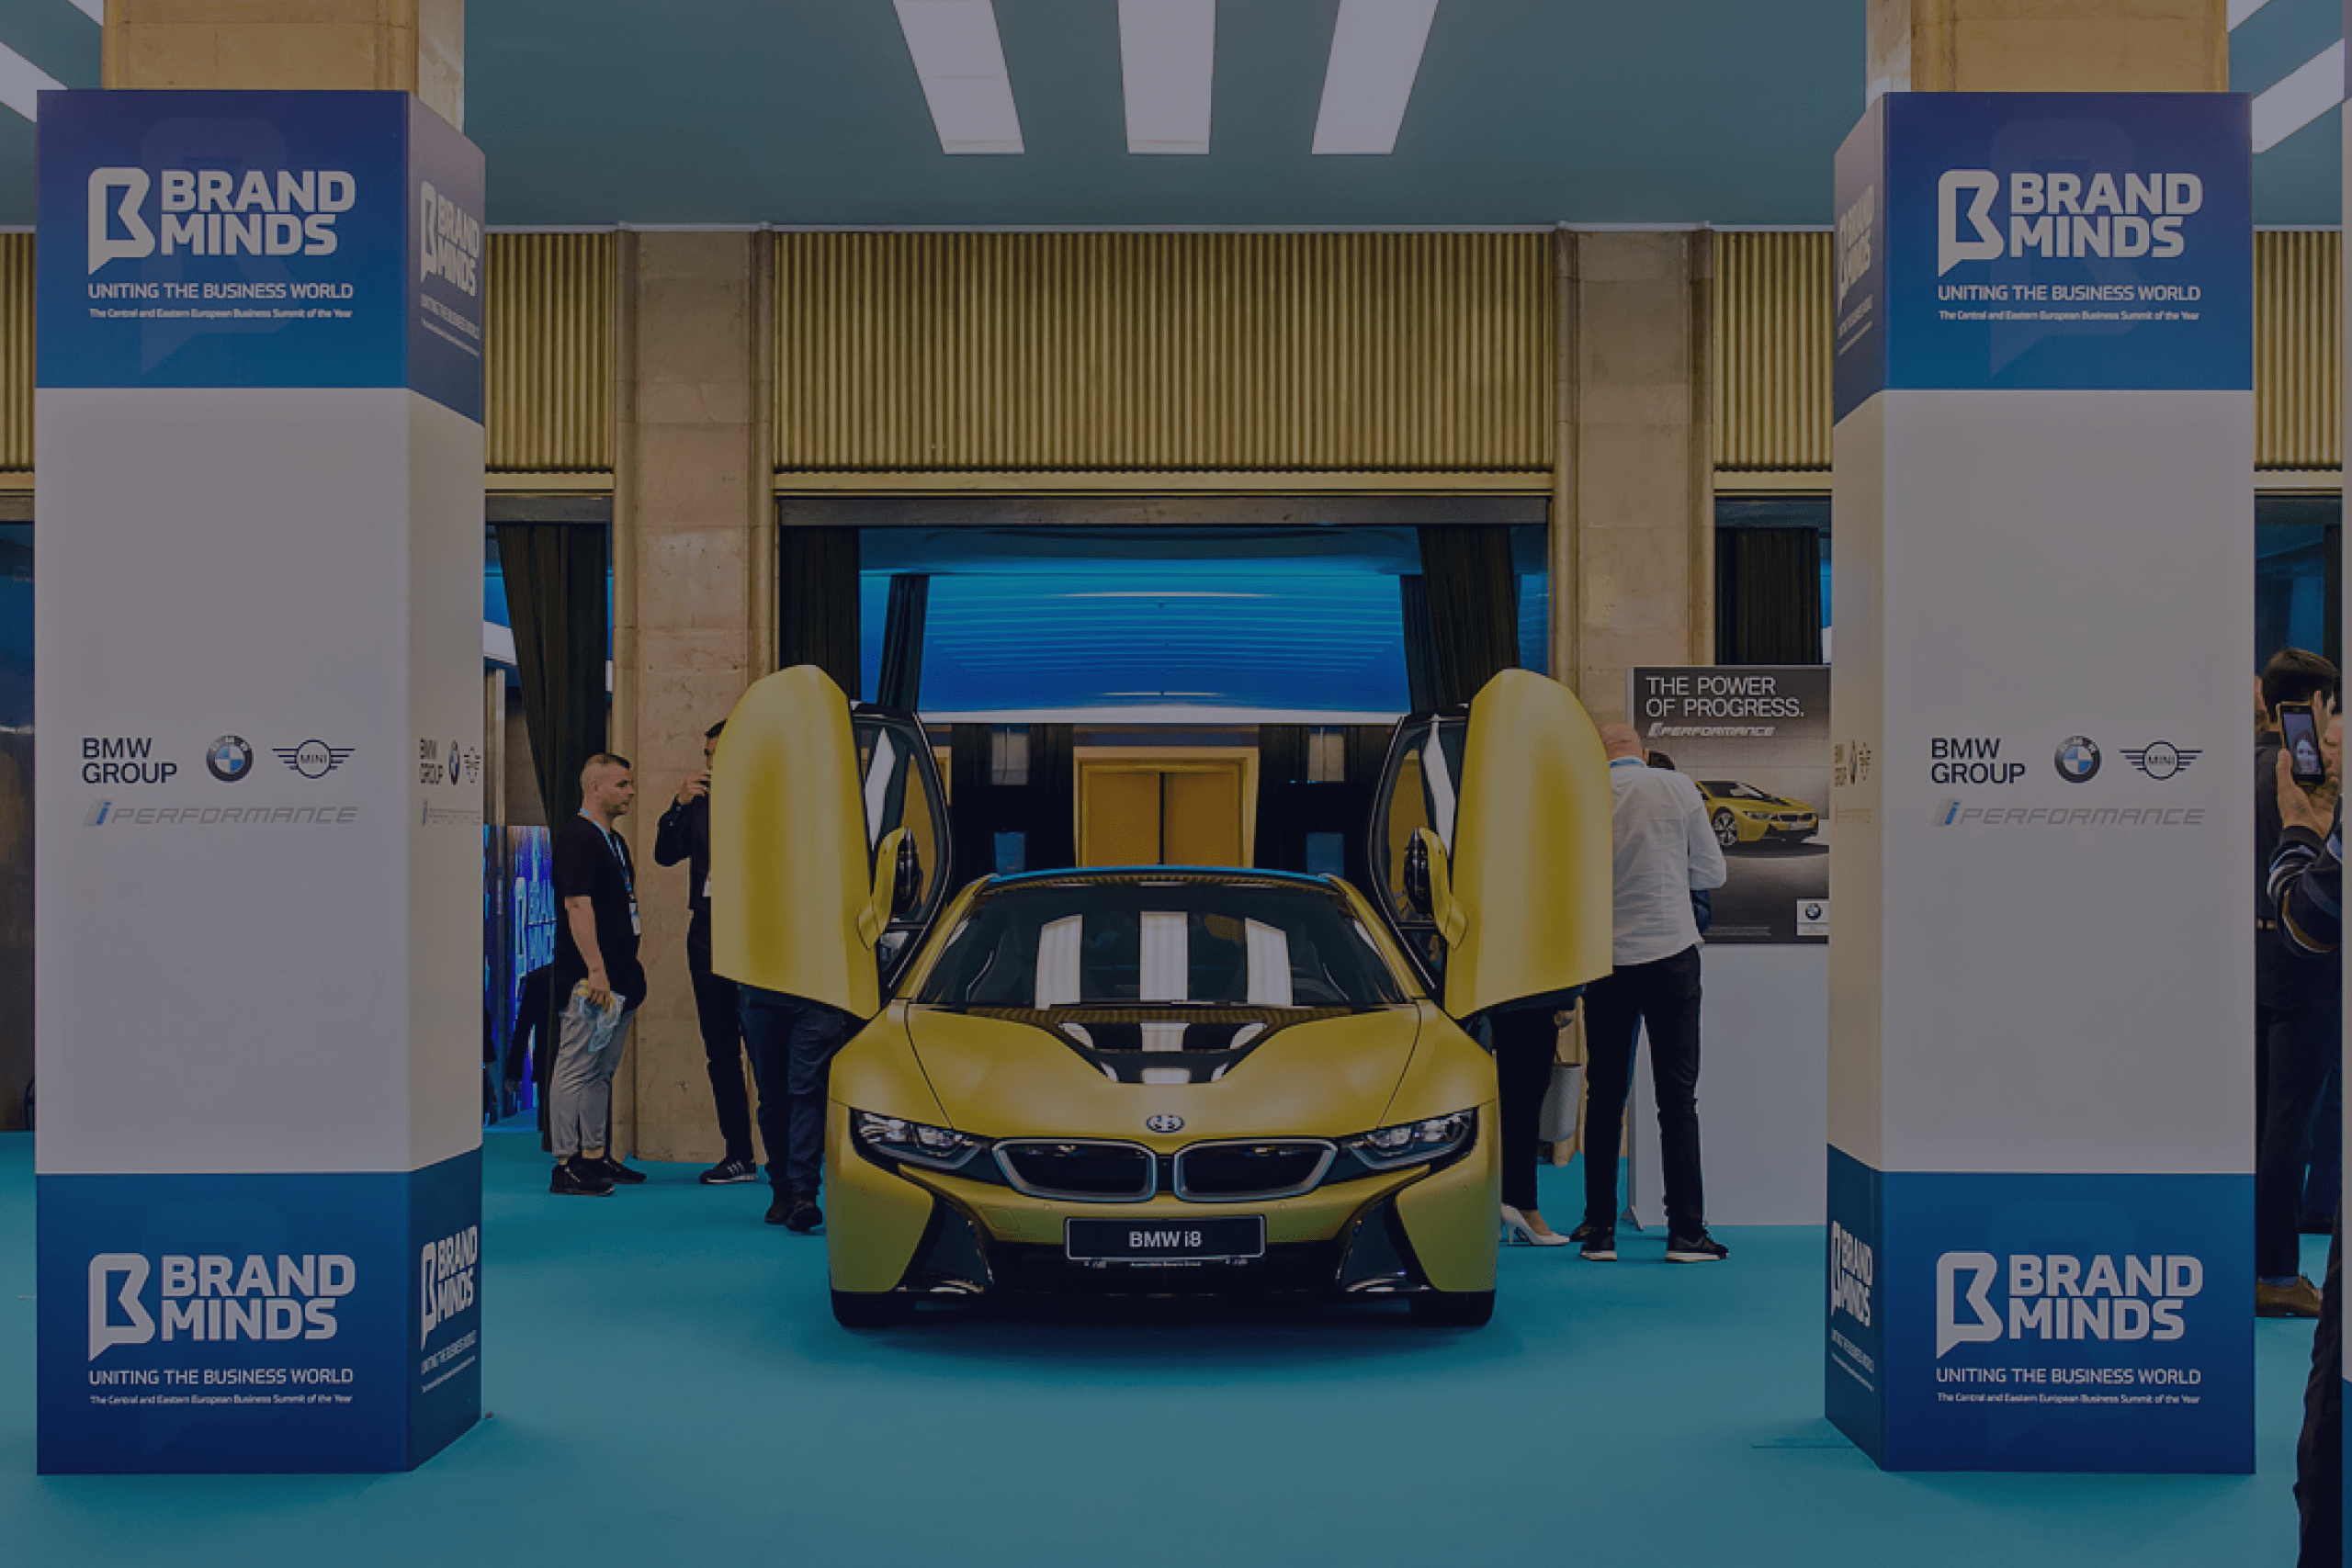 In 2022, BMW and BRAND MINDS are shaping the business world of tomorrow